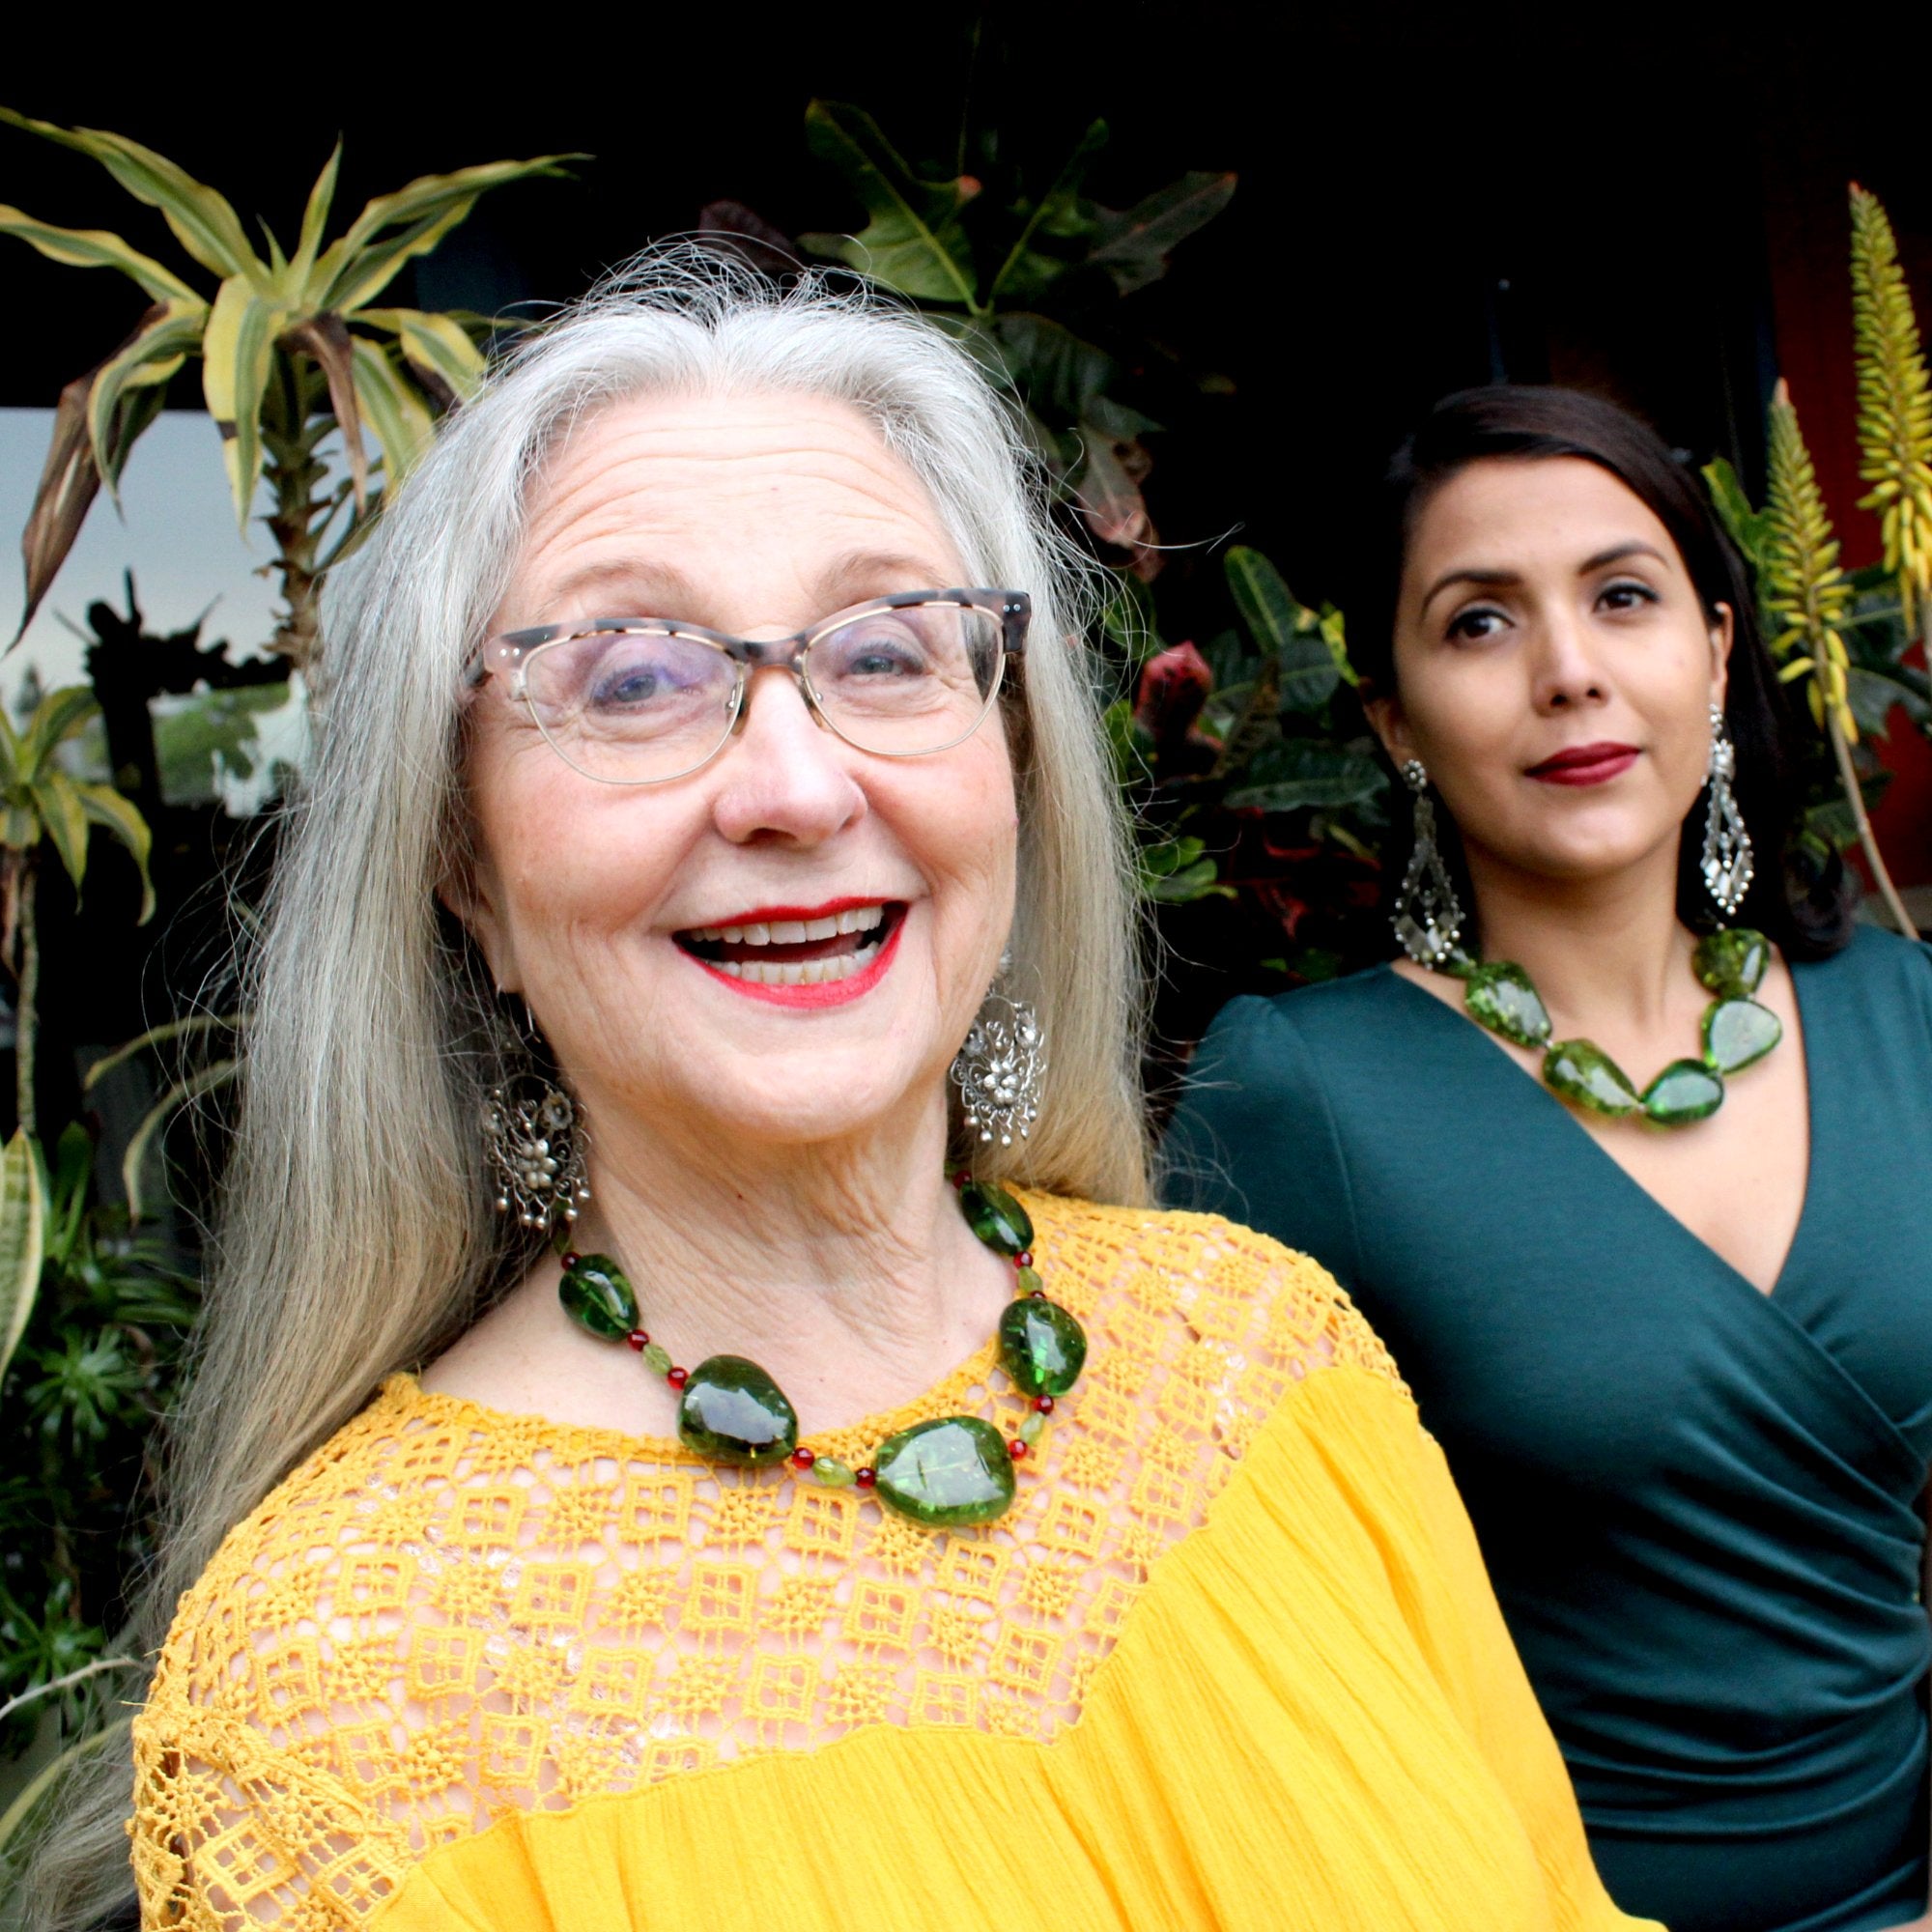 Two models are shown wearing two different variations of my Caribbean Green Amber necklaces, the one in this listing is worn by a smiling, silver haired, older model with white skin, red lipstick, black eyeliner, blue eyes, in a yellow crochet crew neck top. The necklace falls over her top, right in the center of her chest, just below the collar bone. They both sit in front of various succulents and other foliage.